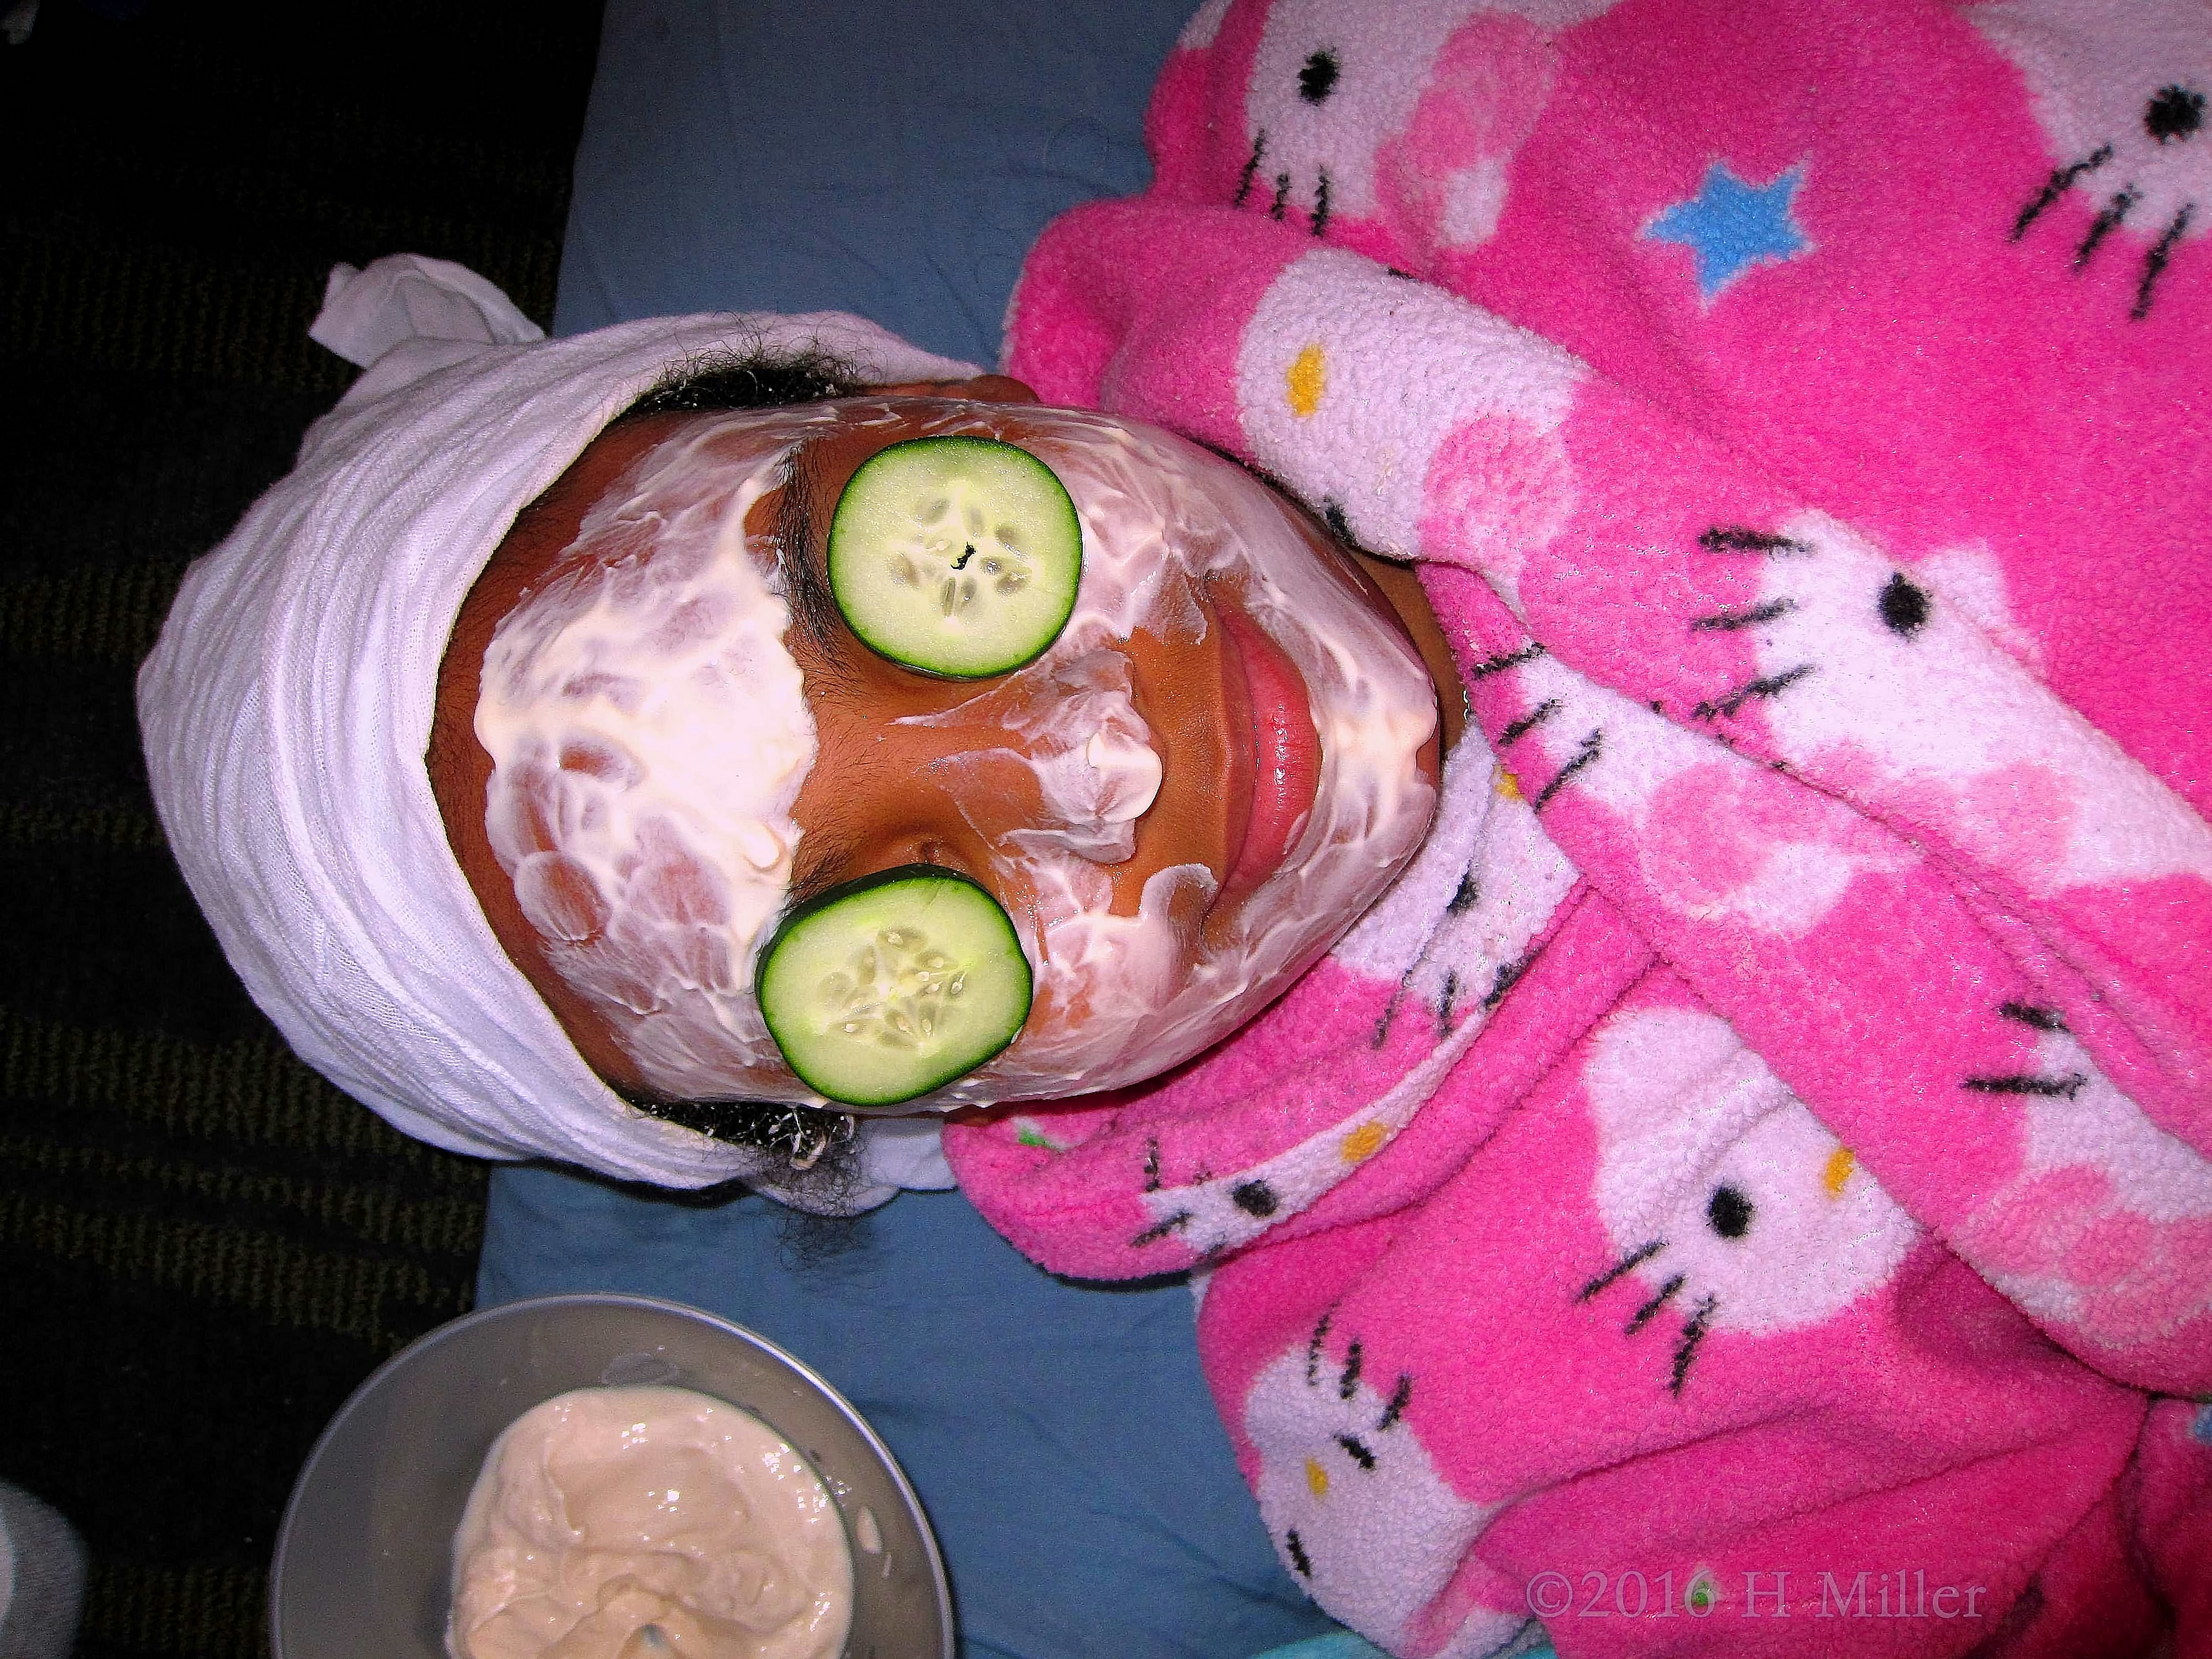 Close View Of Kids Facial With Cukes On The Eyes. 